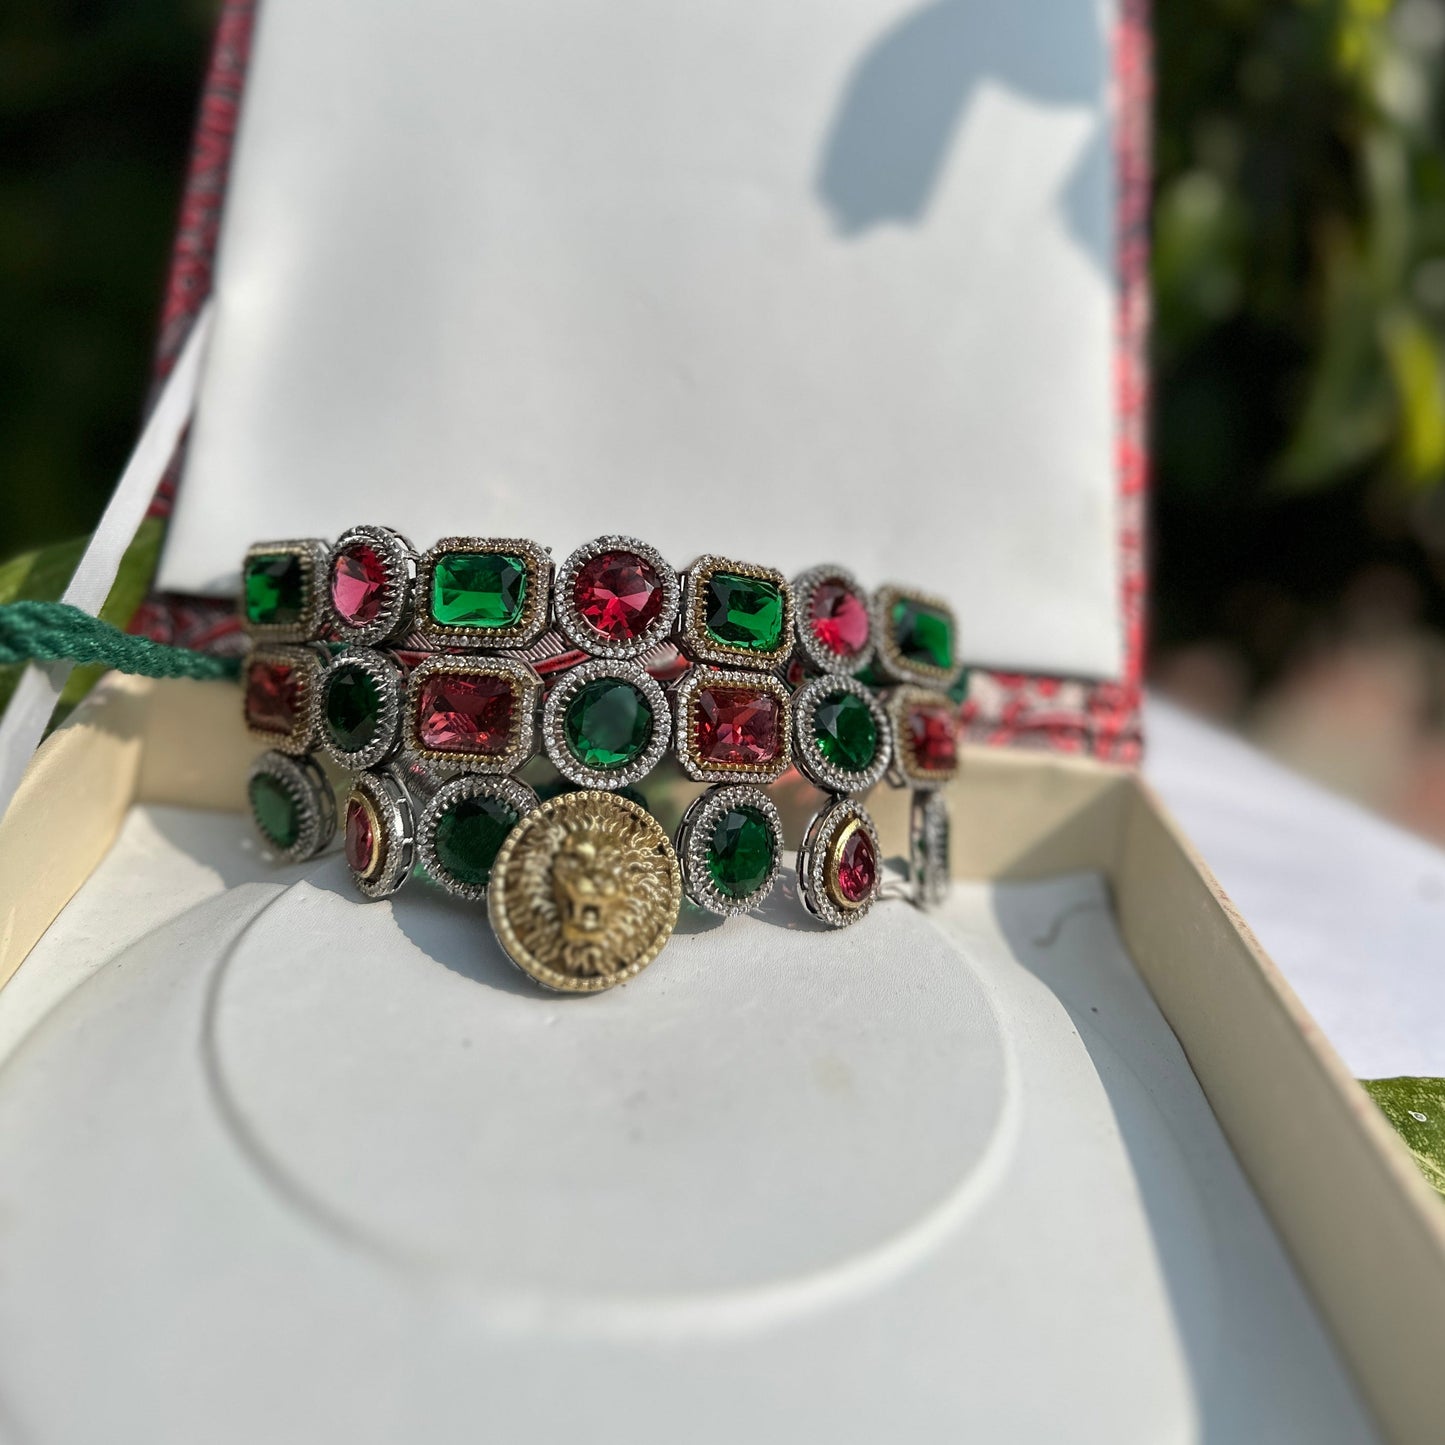 Unmatched Green and Ruby Choker Necklace